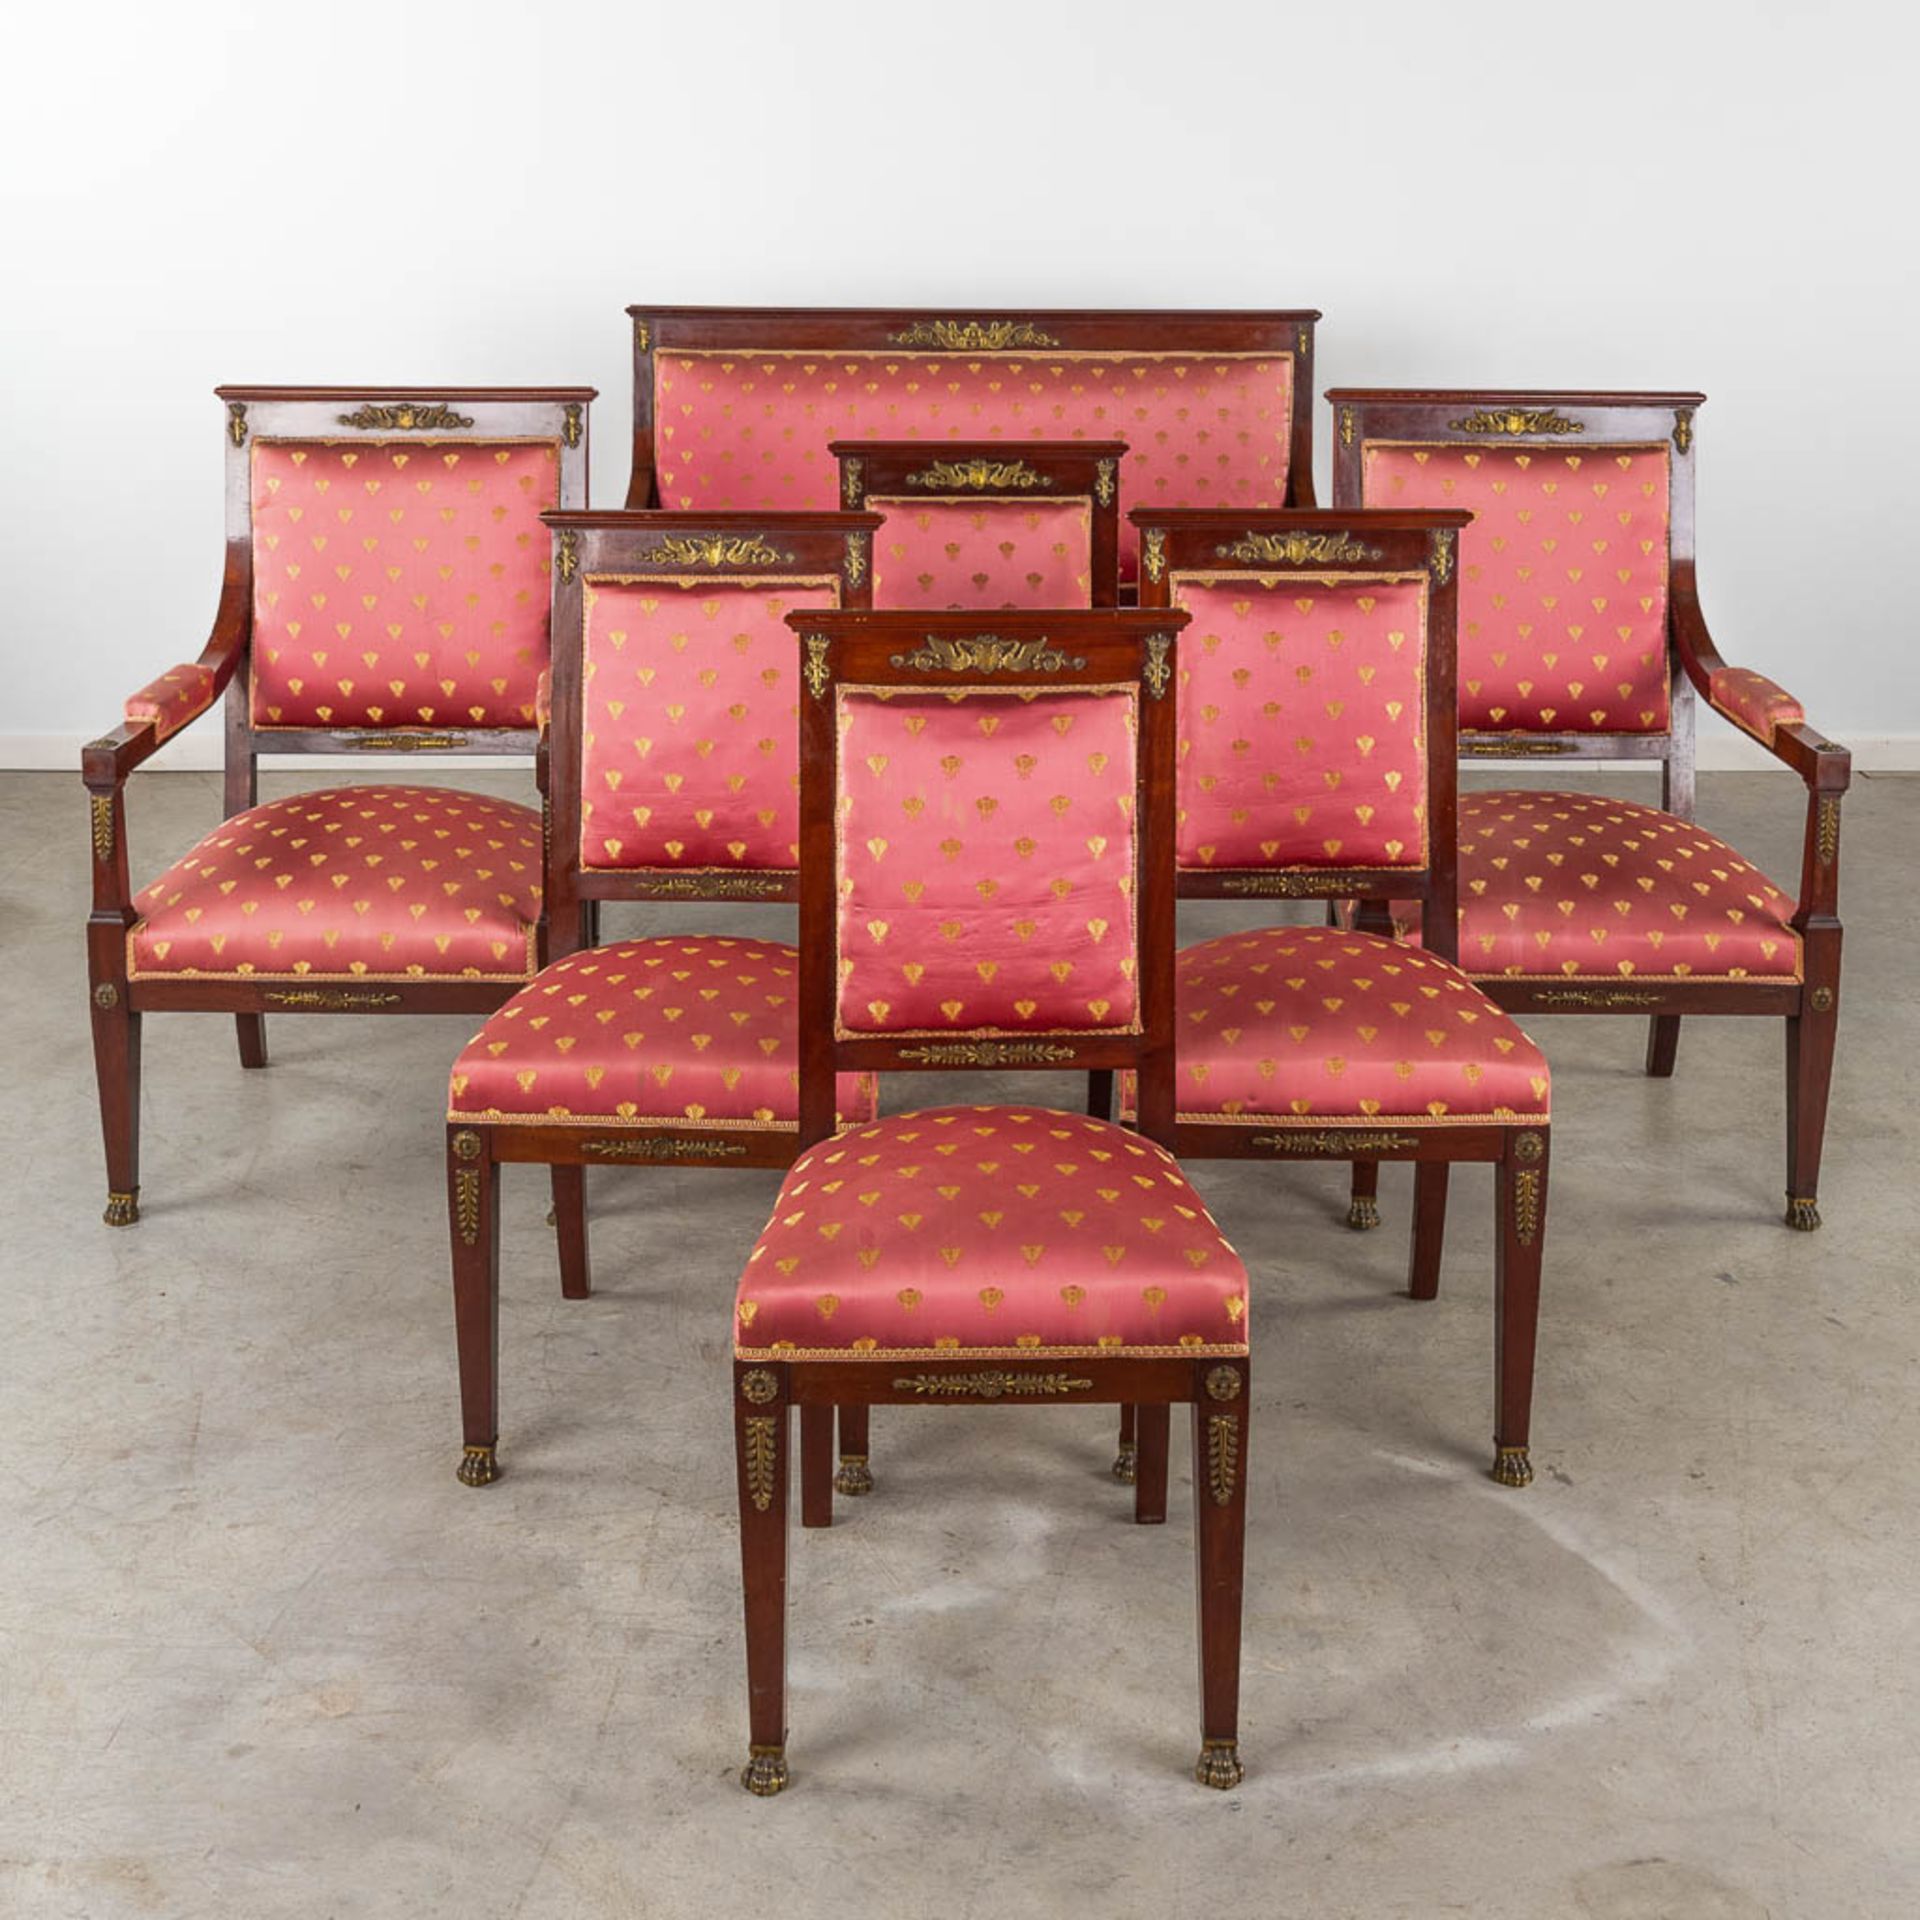 A fine 7-piece salon suite, Empire style, mahogany mounted with bronze. (D:60 x W:130 x H:100 cm)